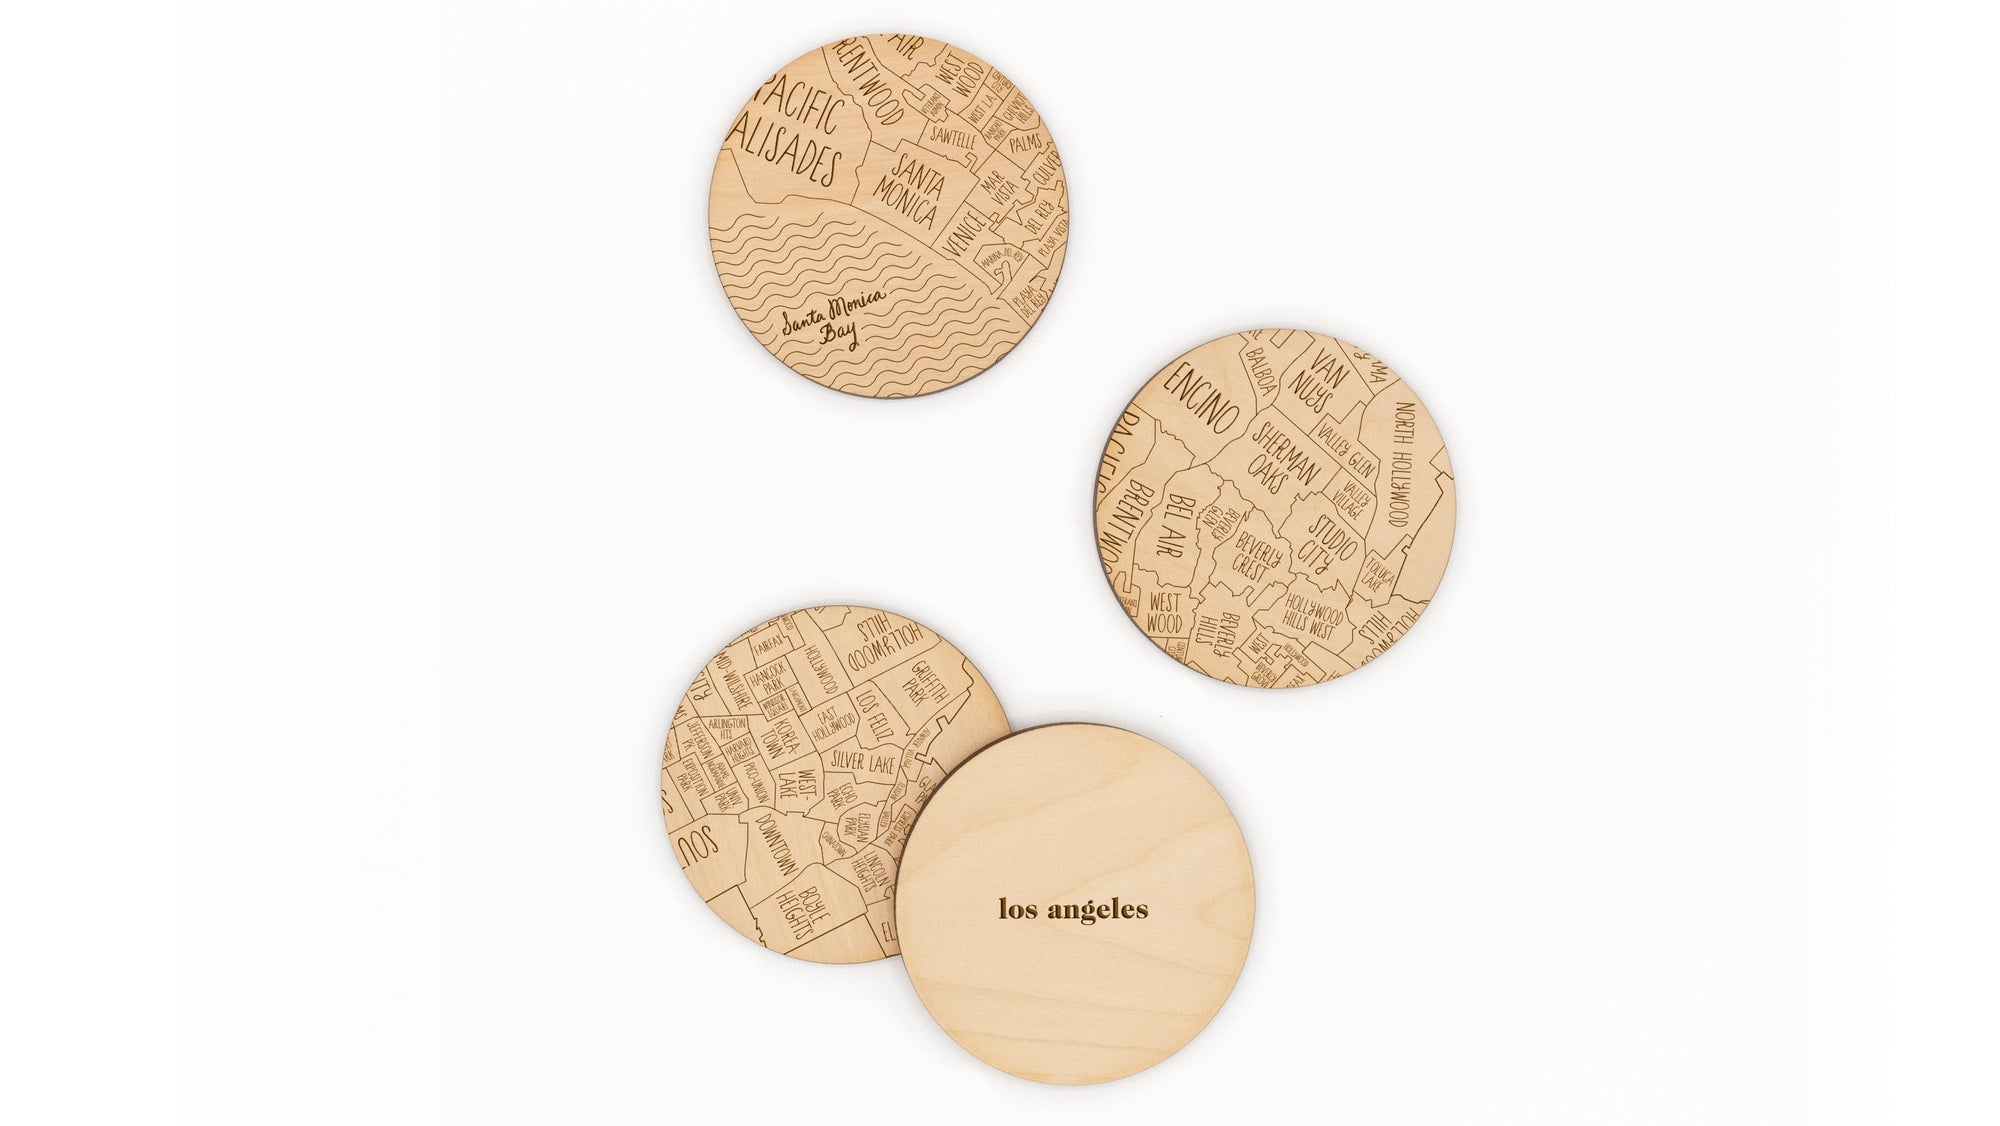 LOS ANGELES COASTERS — FROM HERE TO THERE CURATED